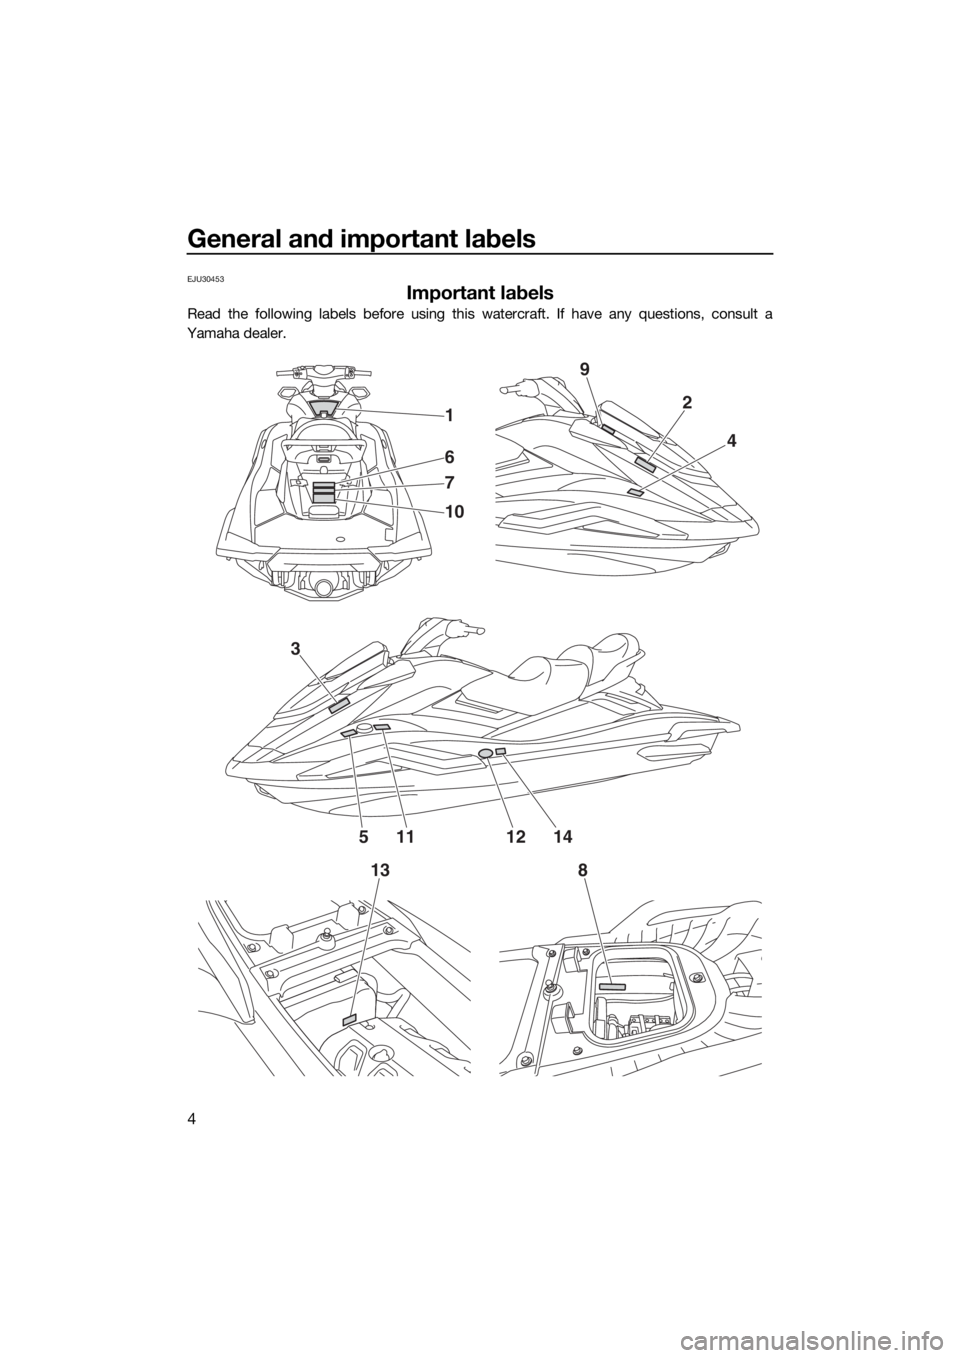 YAMAHA FX HO CRUISER 2019  Owners Manual General and important labels
4
EJU30453
Important labels
Read the following labels before using this watercraft. If have any questions, consult a
Yamaha dealer.
1
3
138
5111412
9
2
46
7
10
UF3V70E0.bo